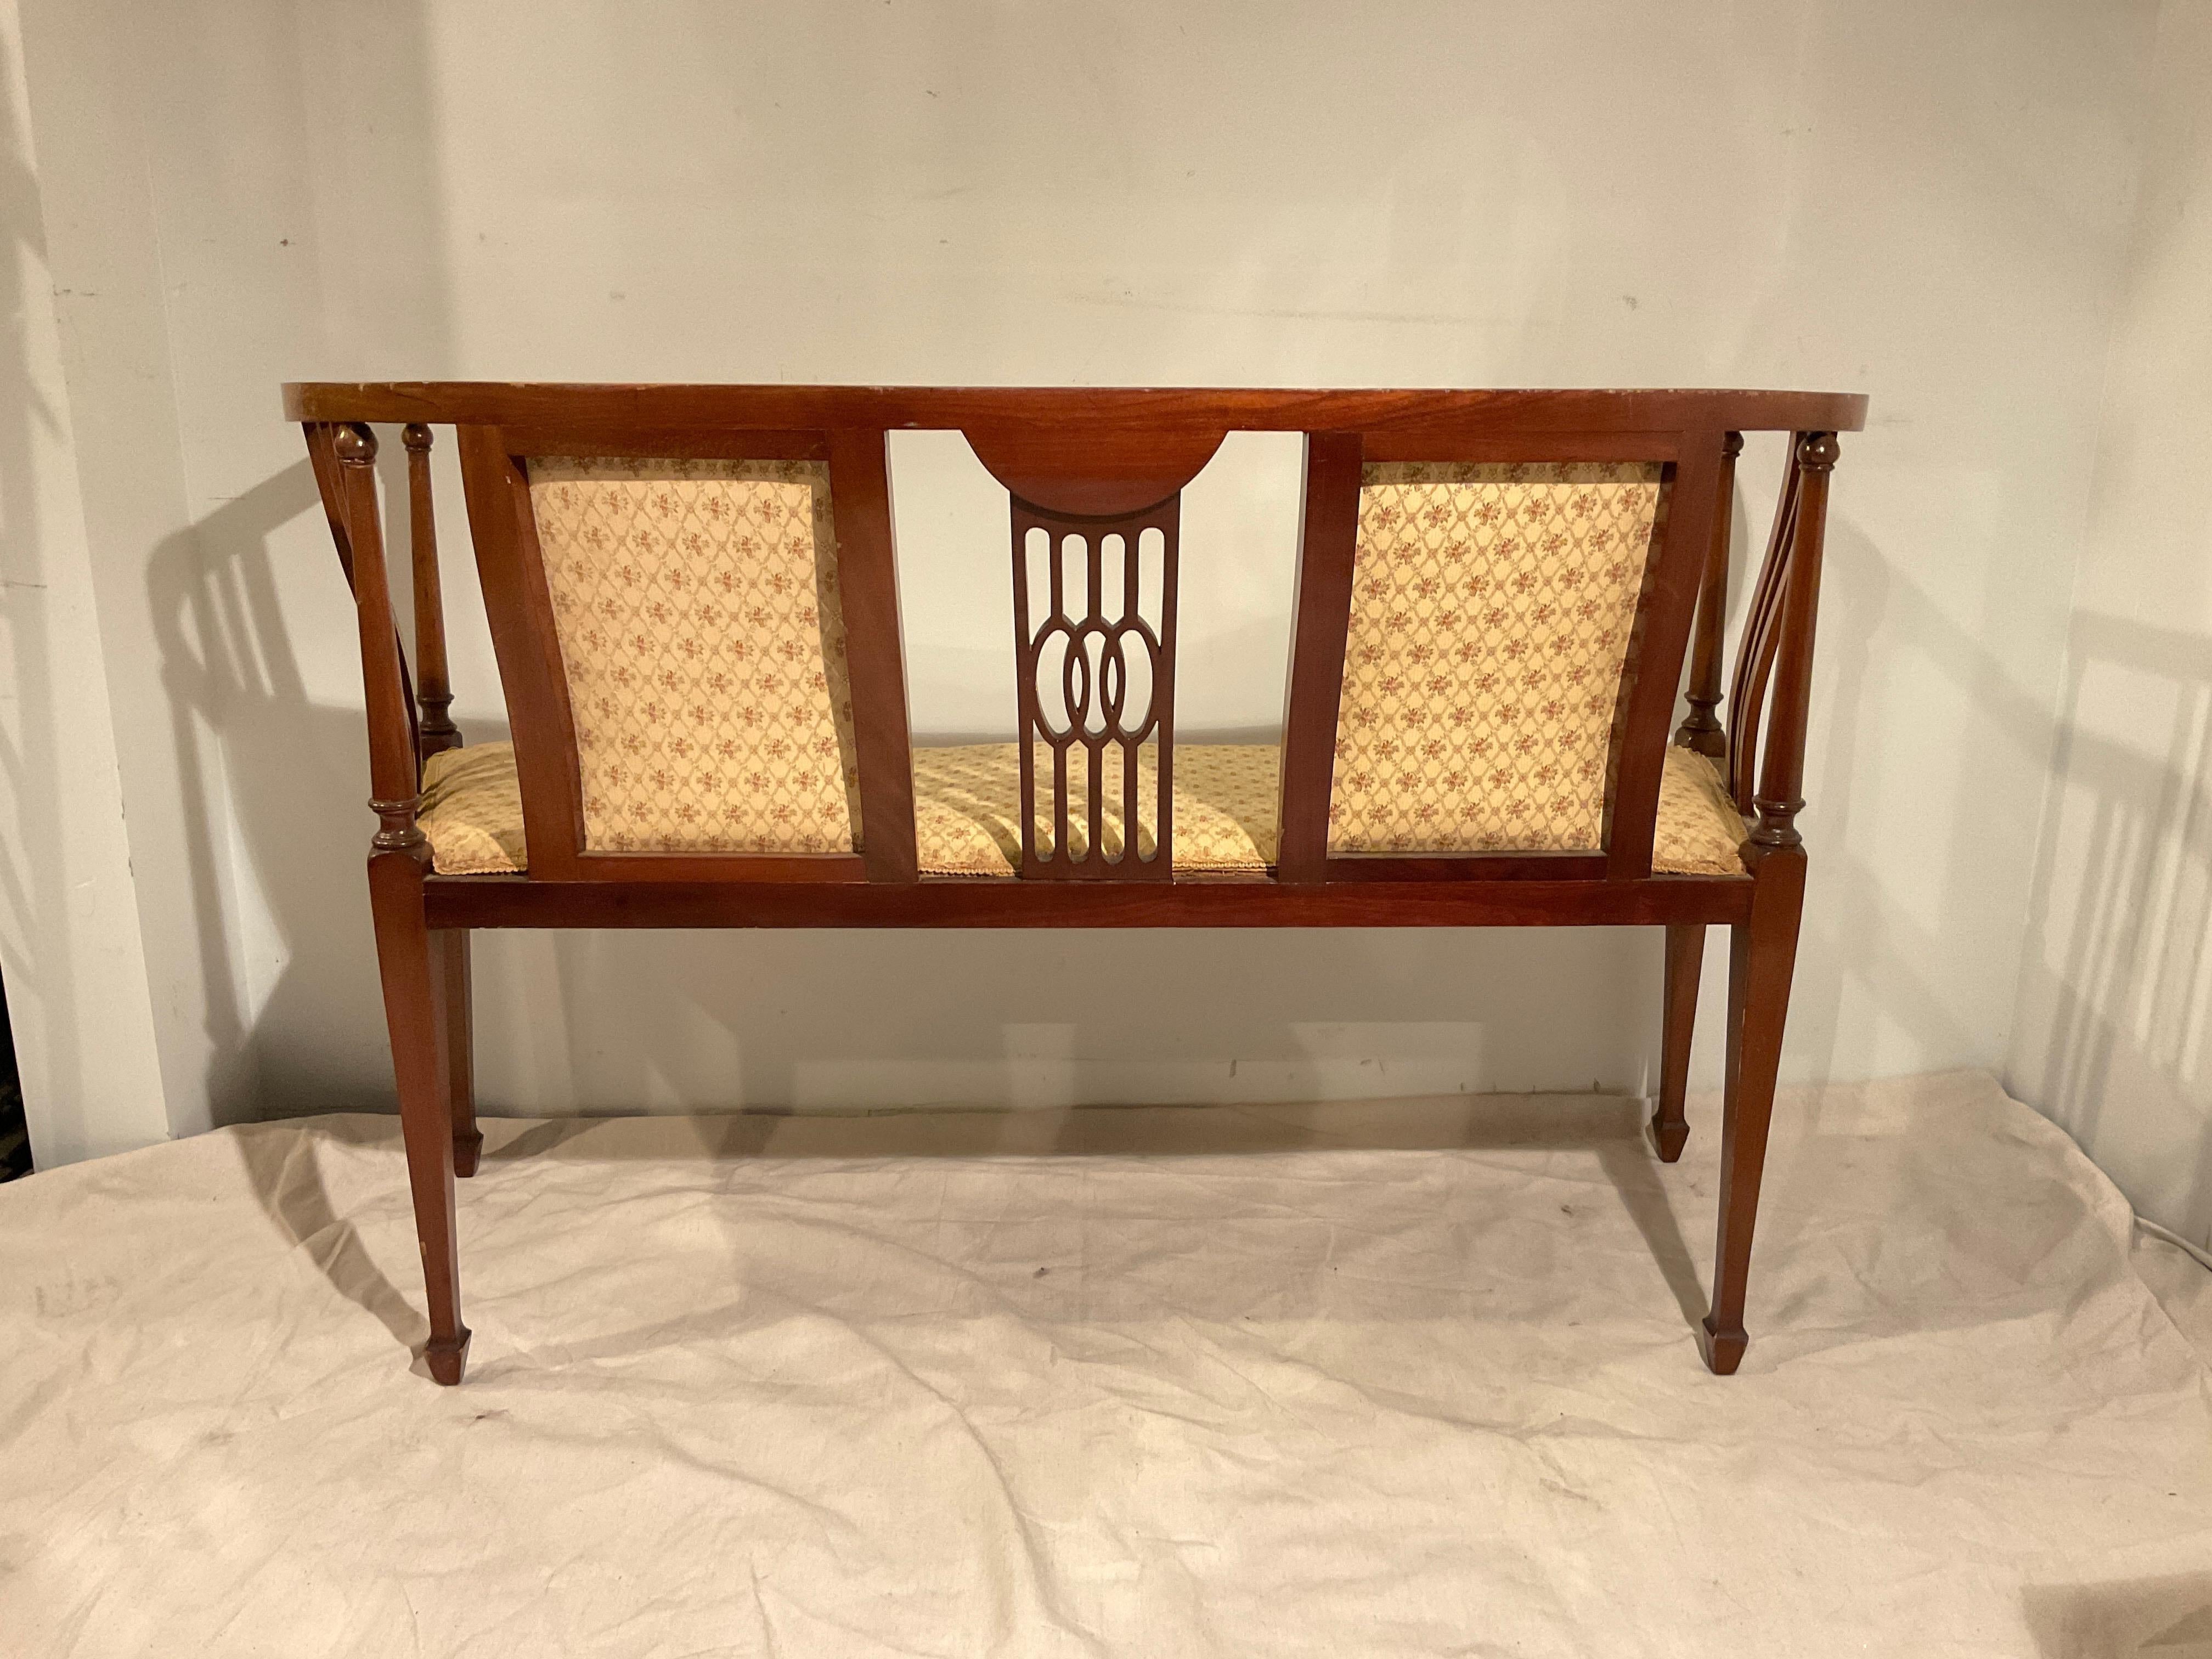 Wood 1910 Art Nouveau Inlaid Settee For Sale